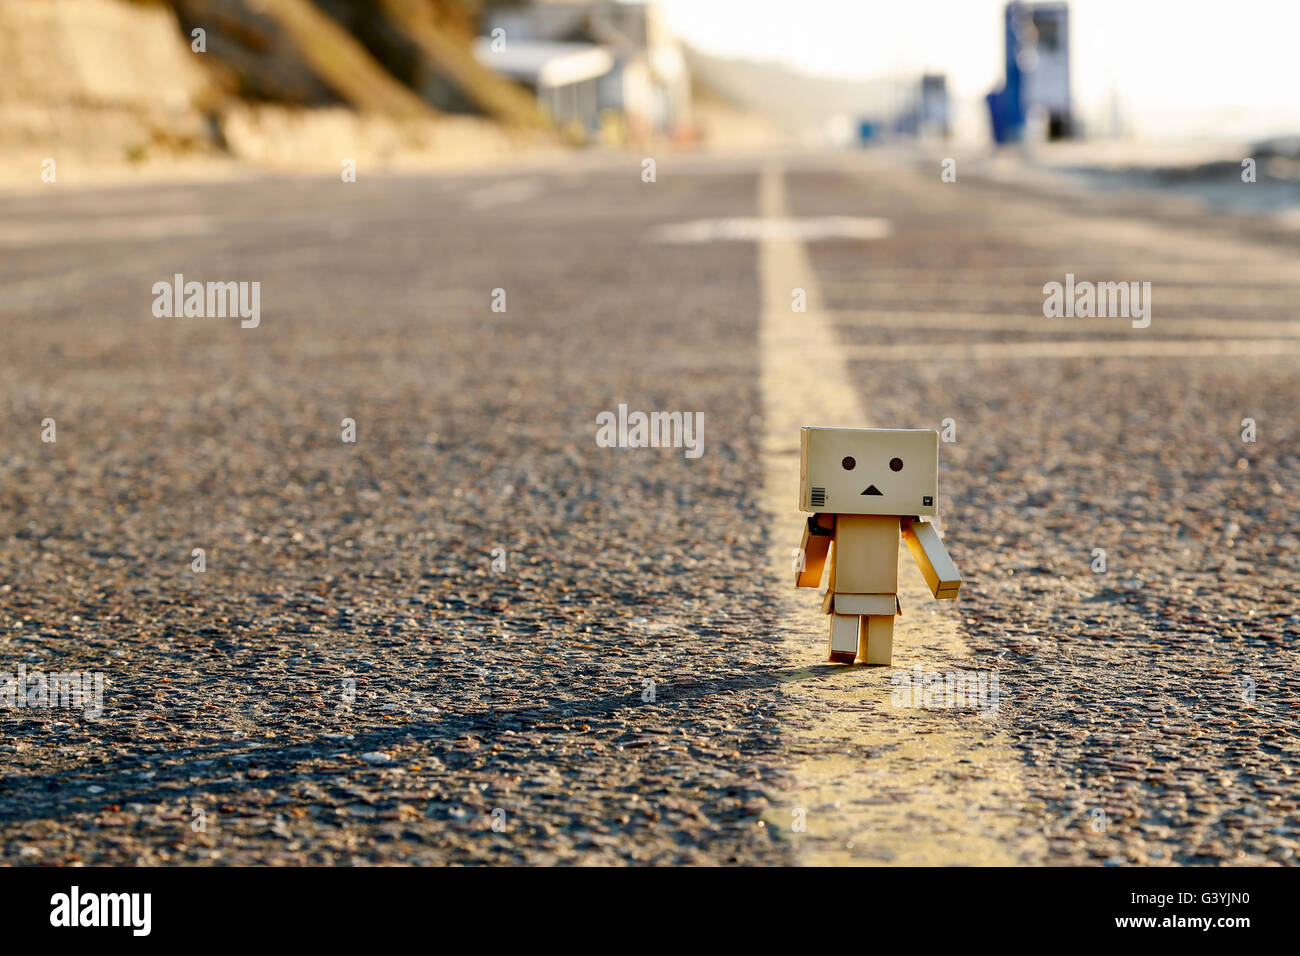 A Danbo Danboard fictional Robot Character walking along the yellow line along the middle of a road Stock Photo